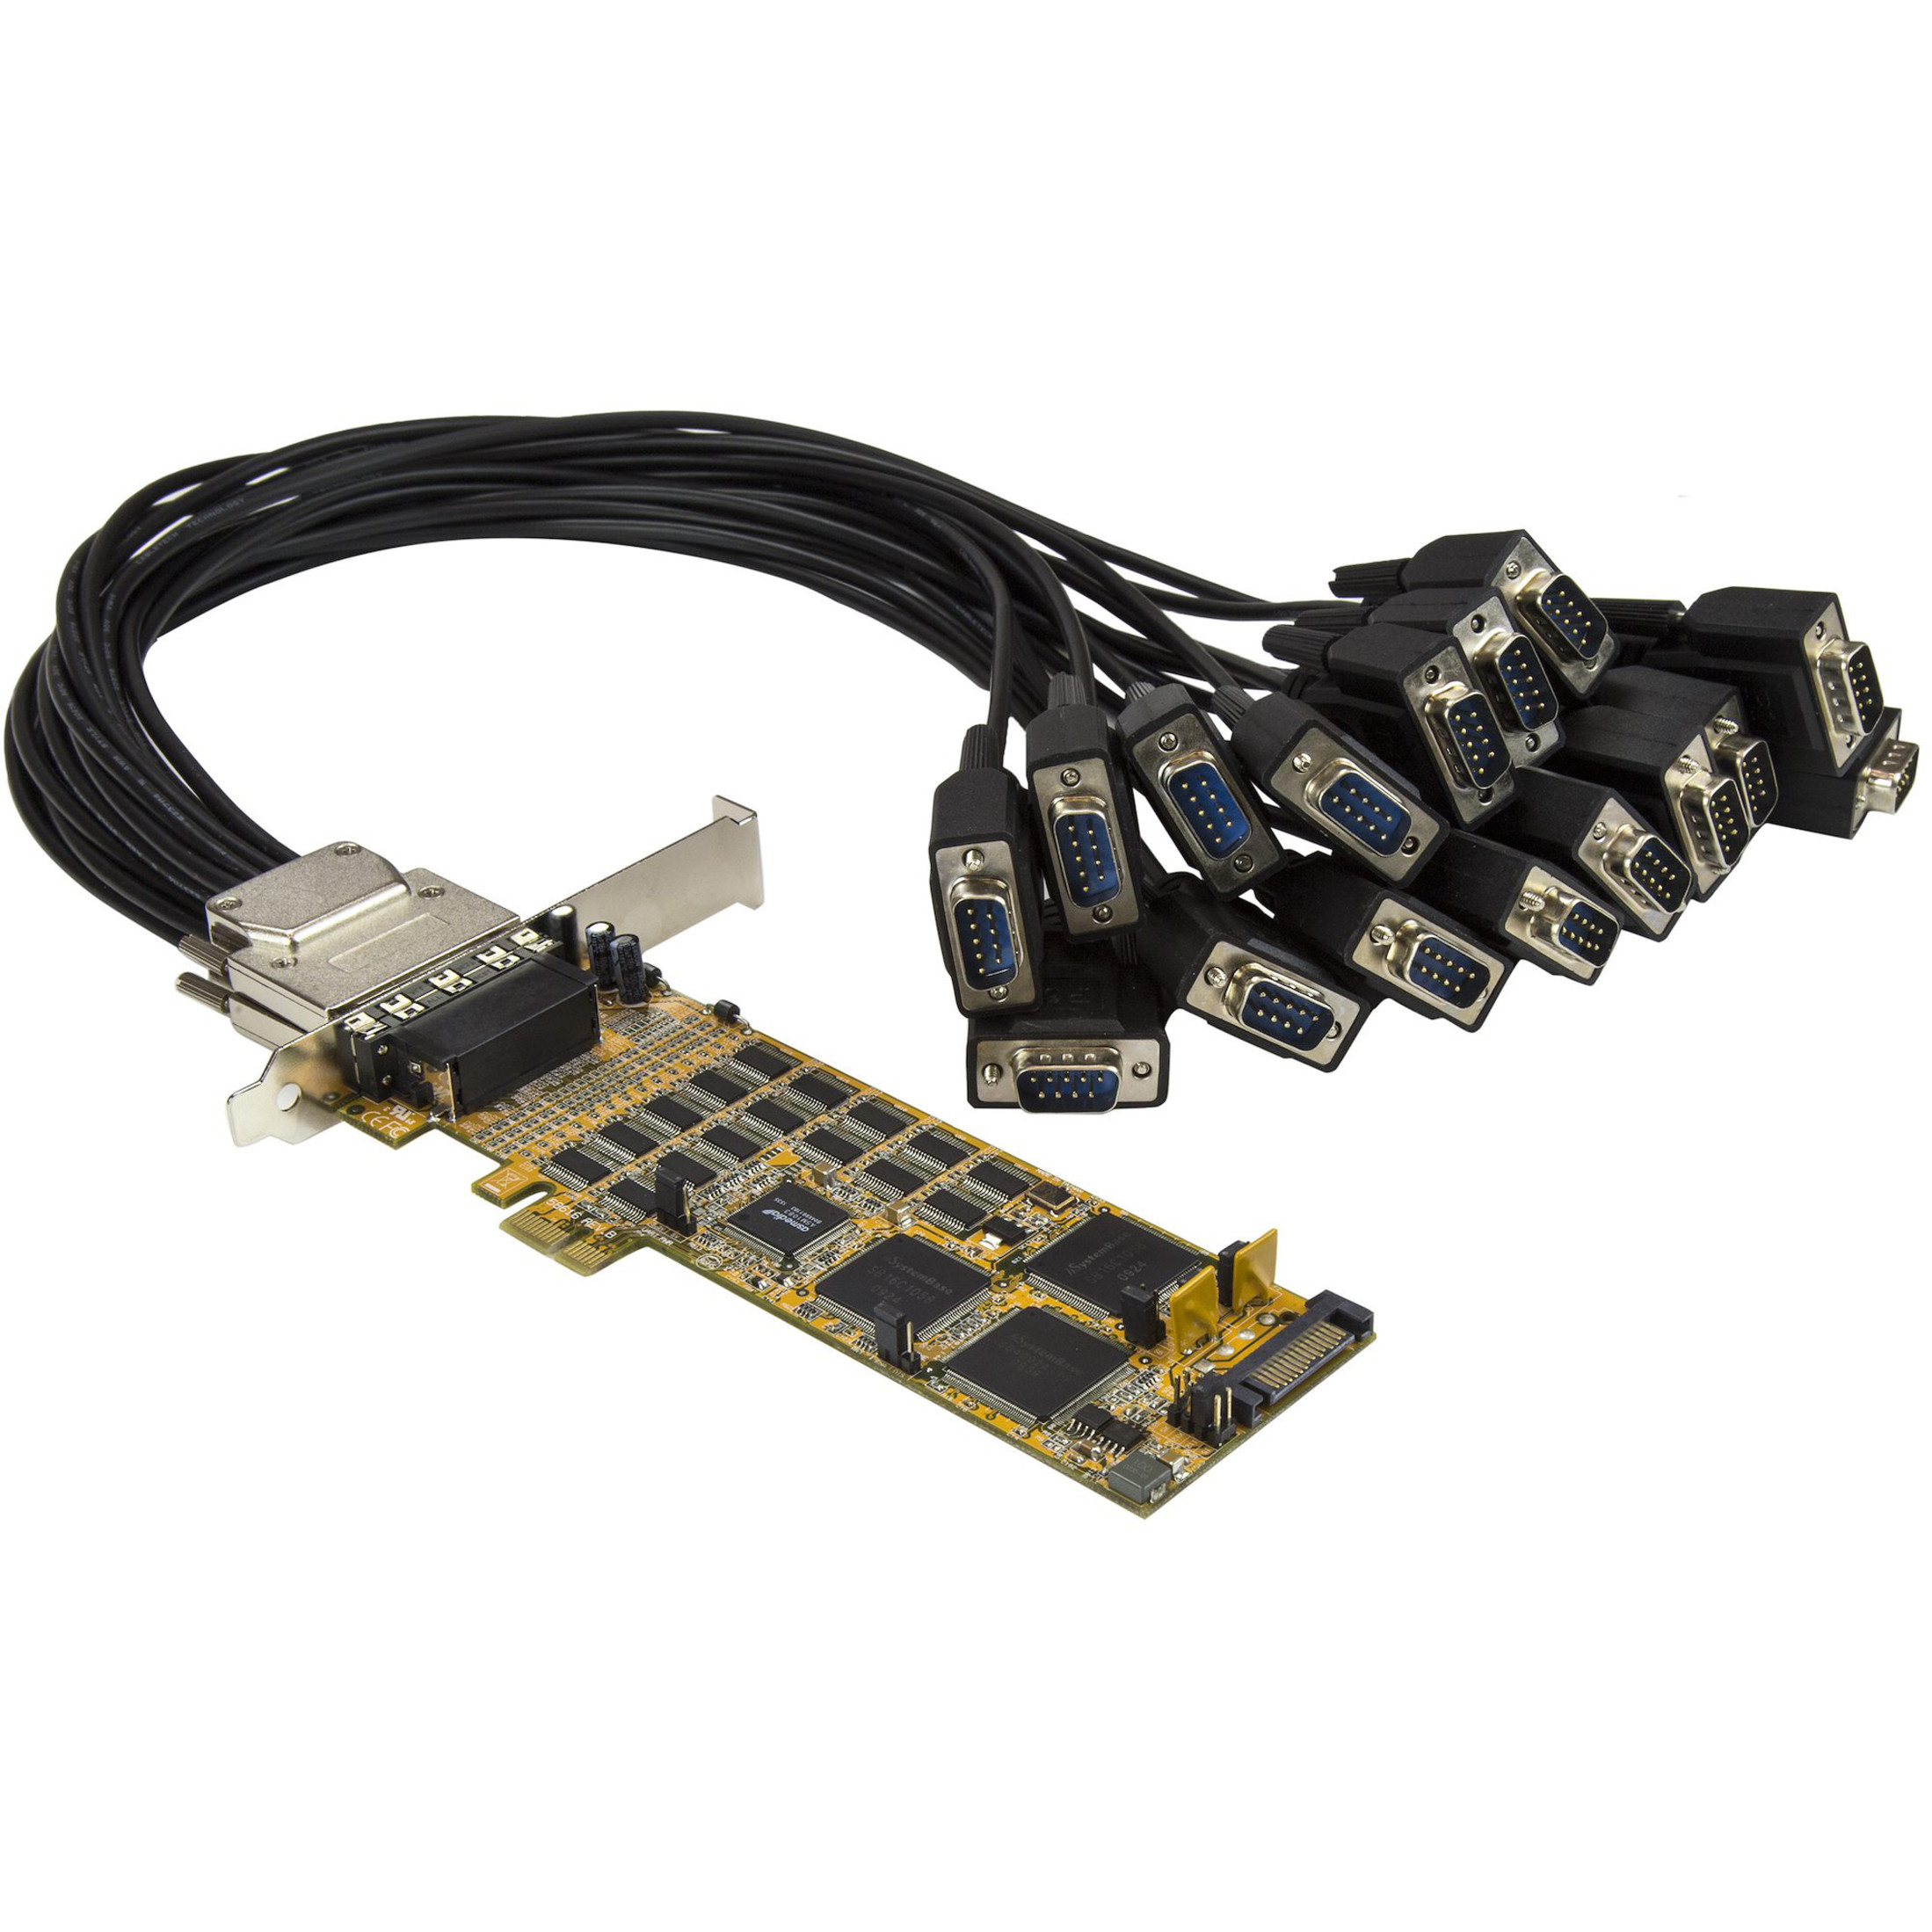 Startech .com 16 Port PCI Express Serial CardLow-ProfileHigh-Speed PCIe Serial Card with 16 DB9 RS232 PortsAdd 16 RS232 serial ports… PEX16S550LP